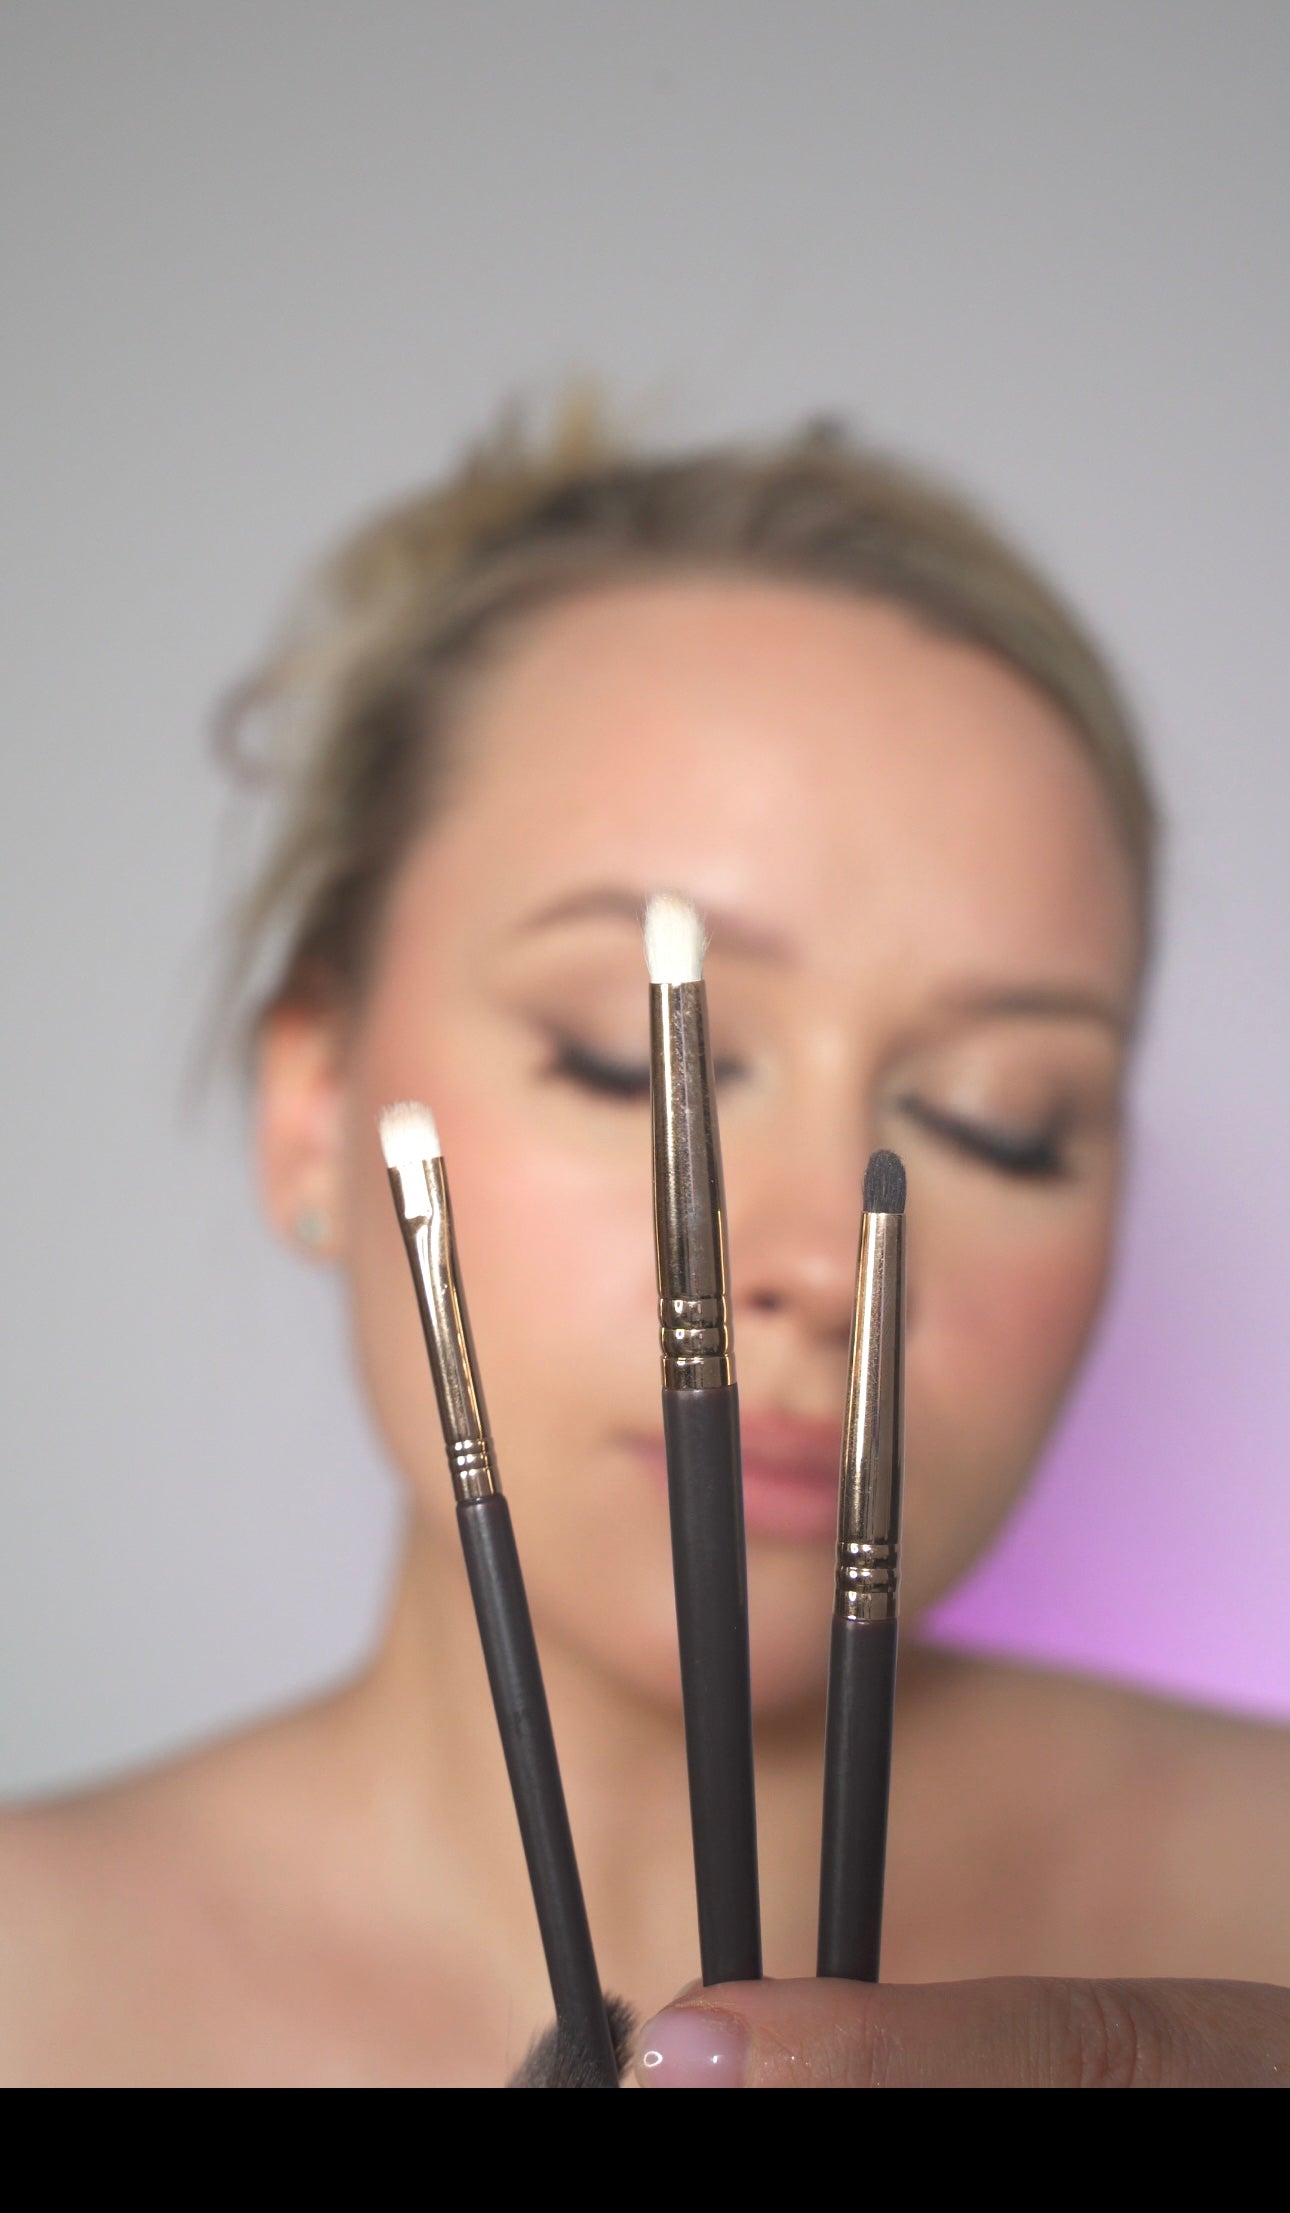 Vkcosmetics luxe collection smallest brushes - Just Violeta